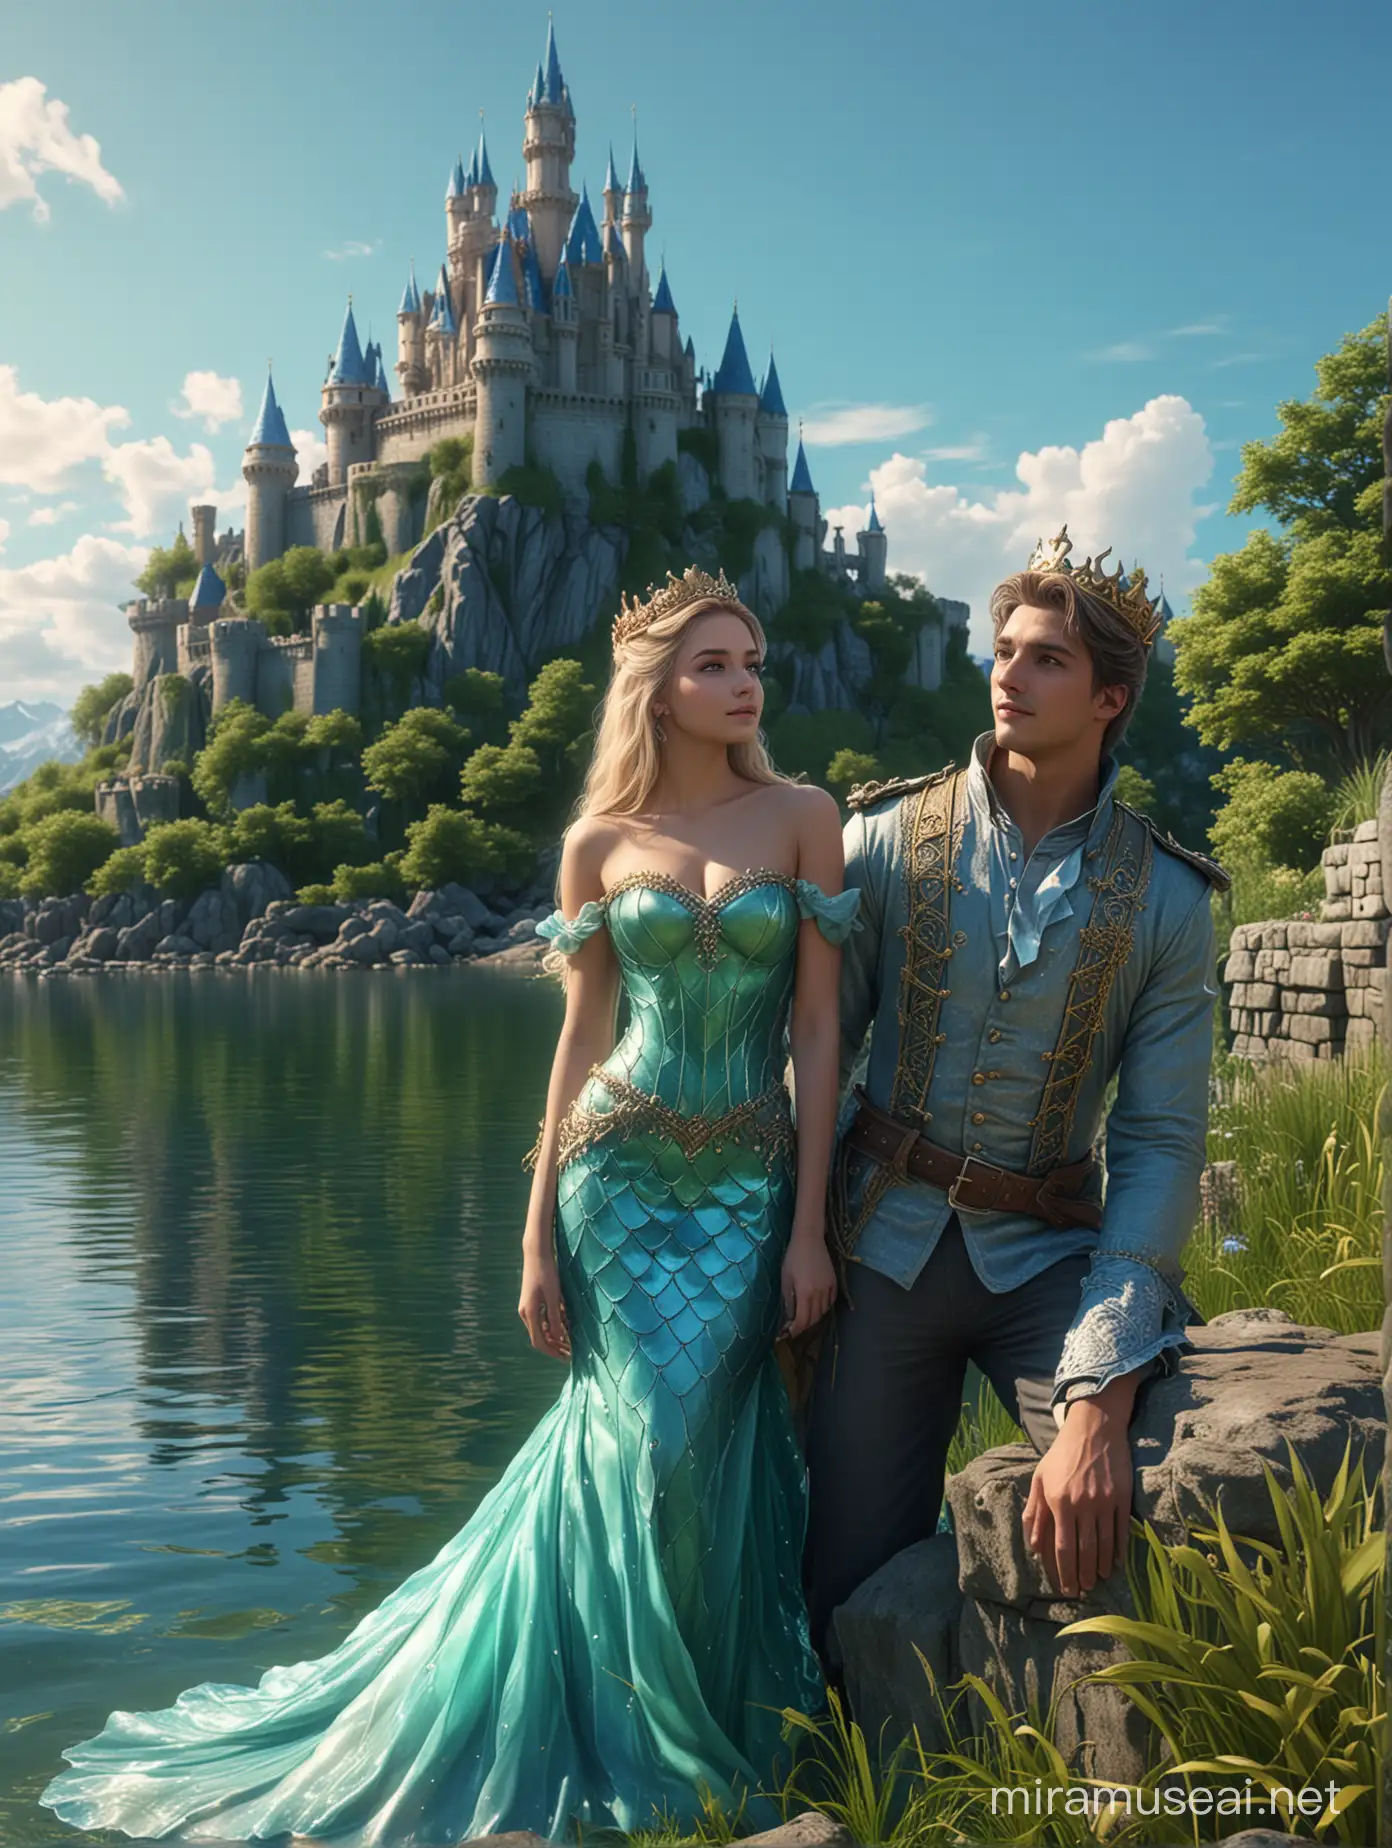 Young Man Leaning on Crowned Mermaid Princess in Enchanted Castle Setting